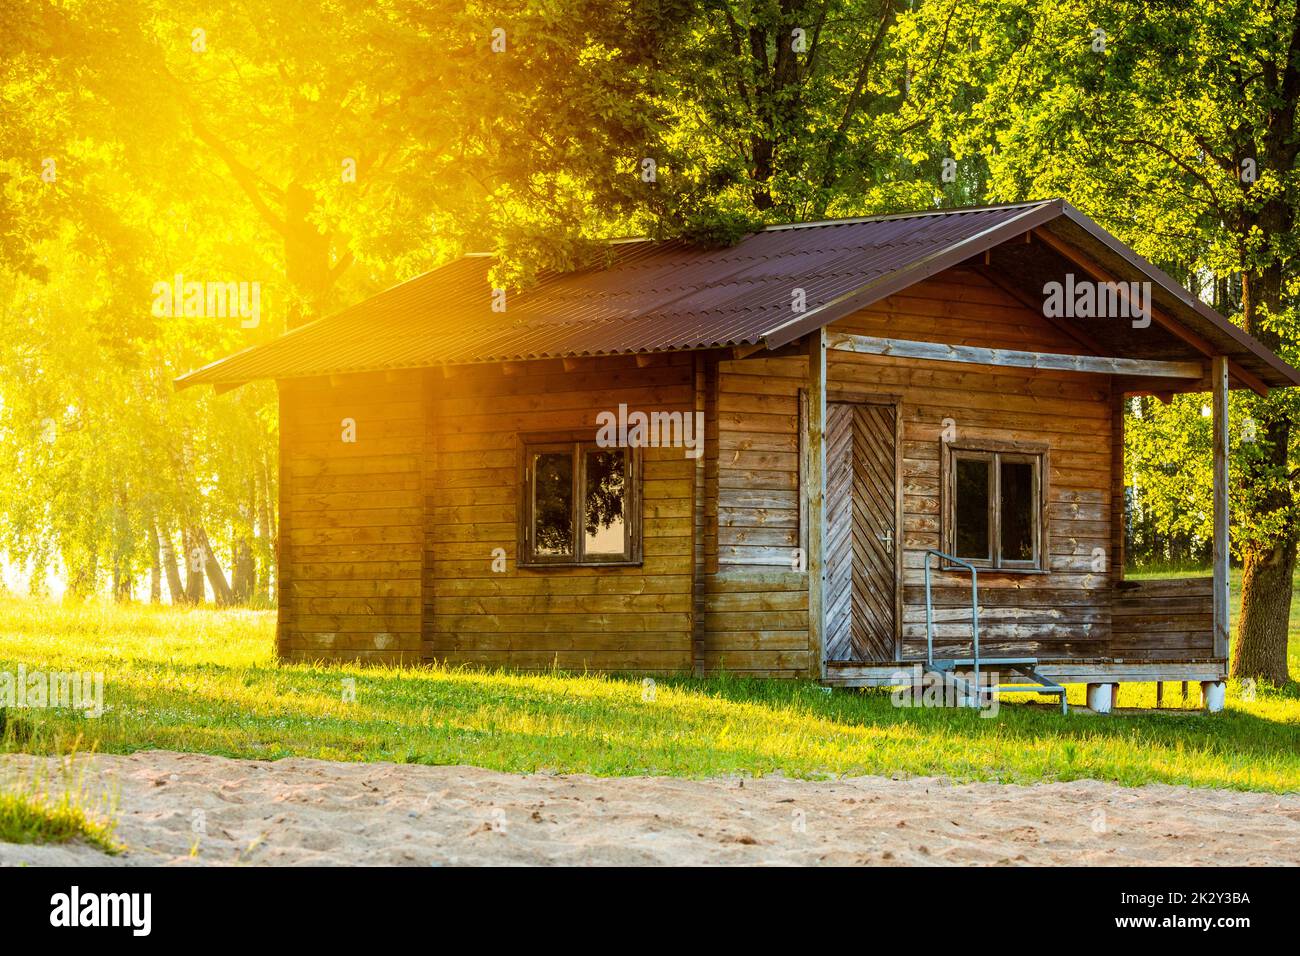 Small wooden house with a trees growing around Stock Photo